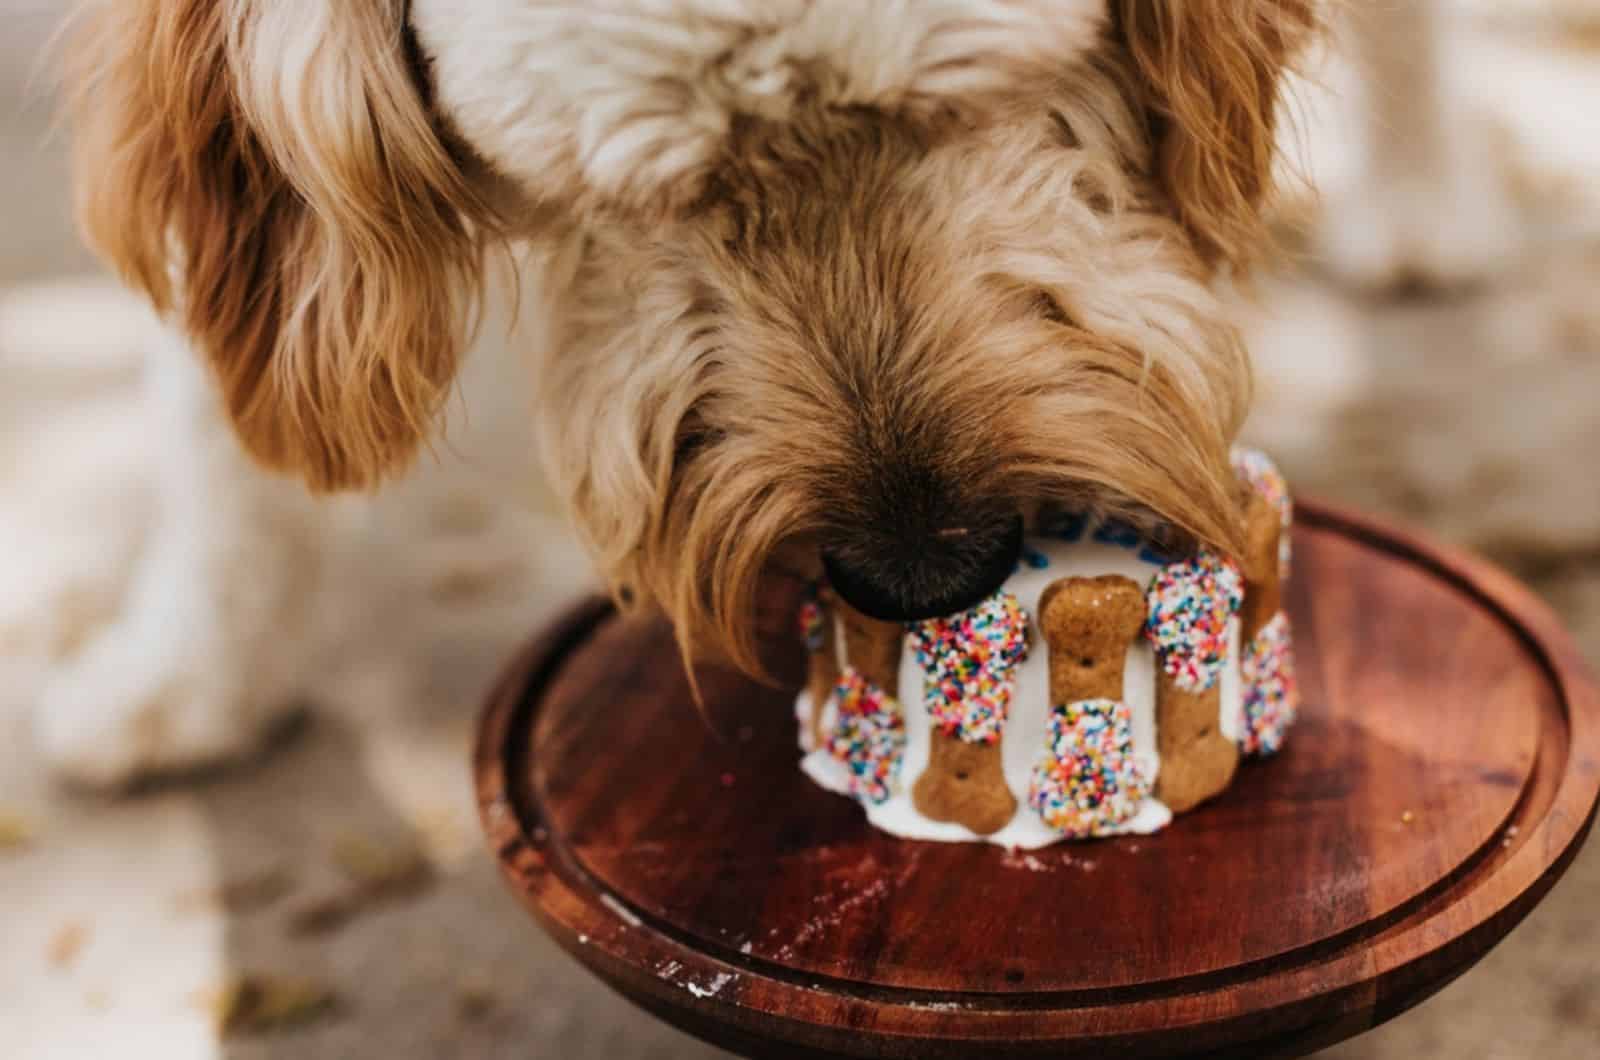 goldendoodle eating his cake treat